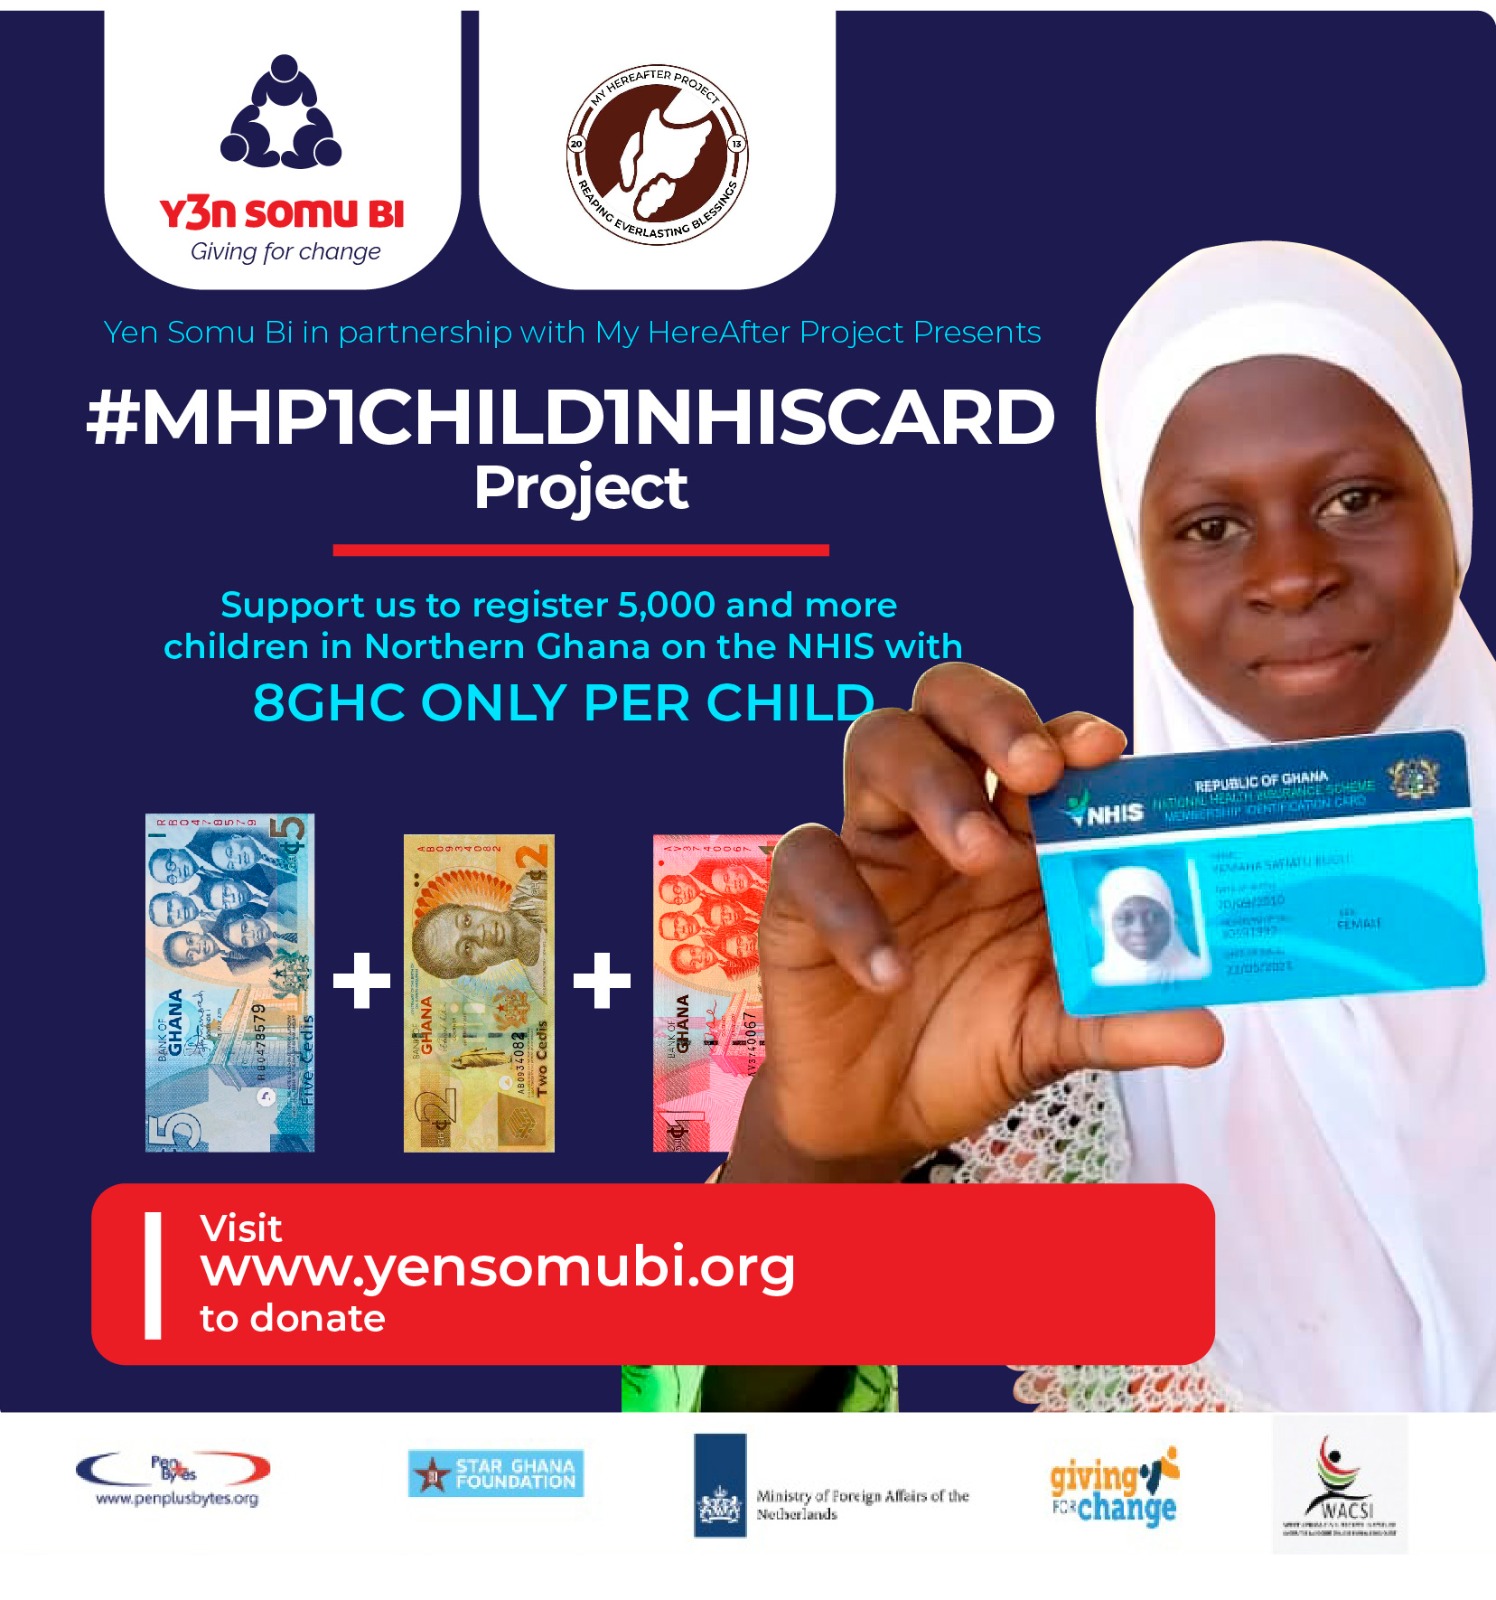 Penplusbytes’ Giving for Change Christmas: A campaign to support the “One Child, One NHIS Card Project” on Yen Somu Bi Crowdfunding Platform